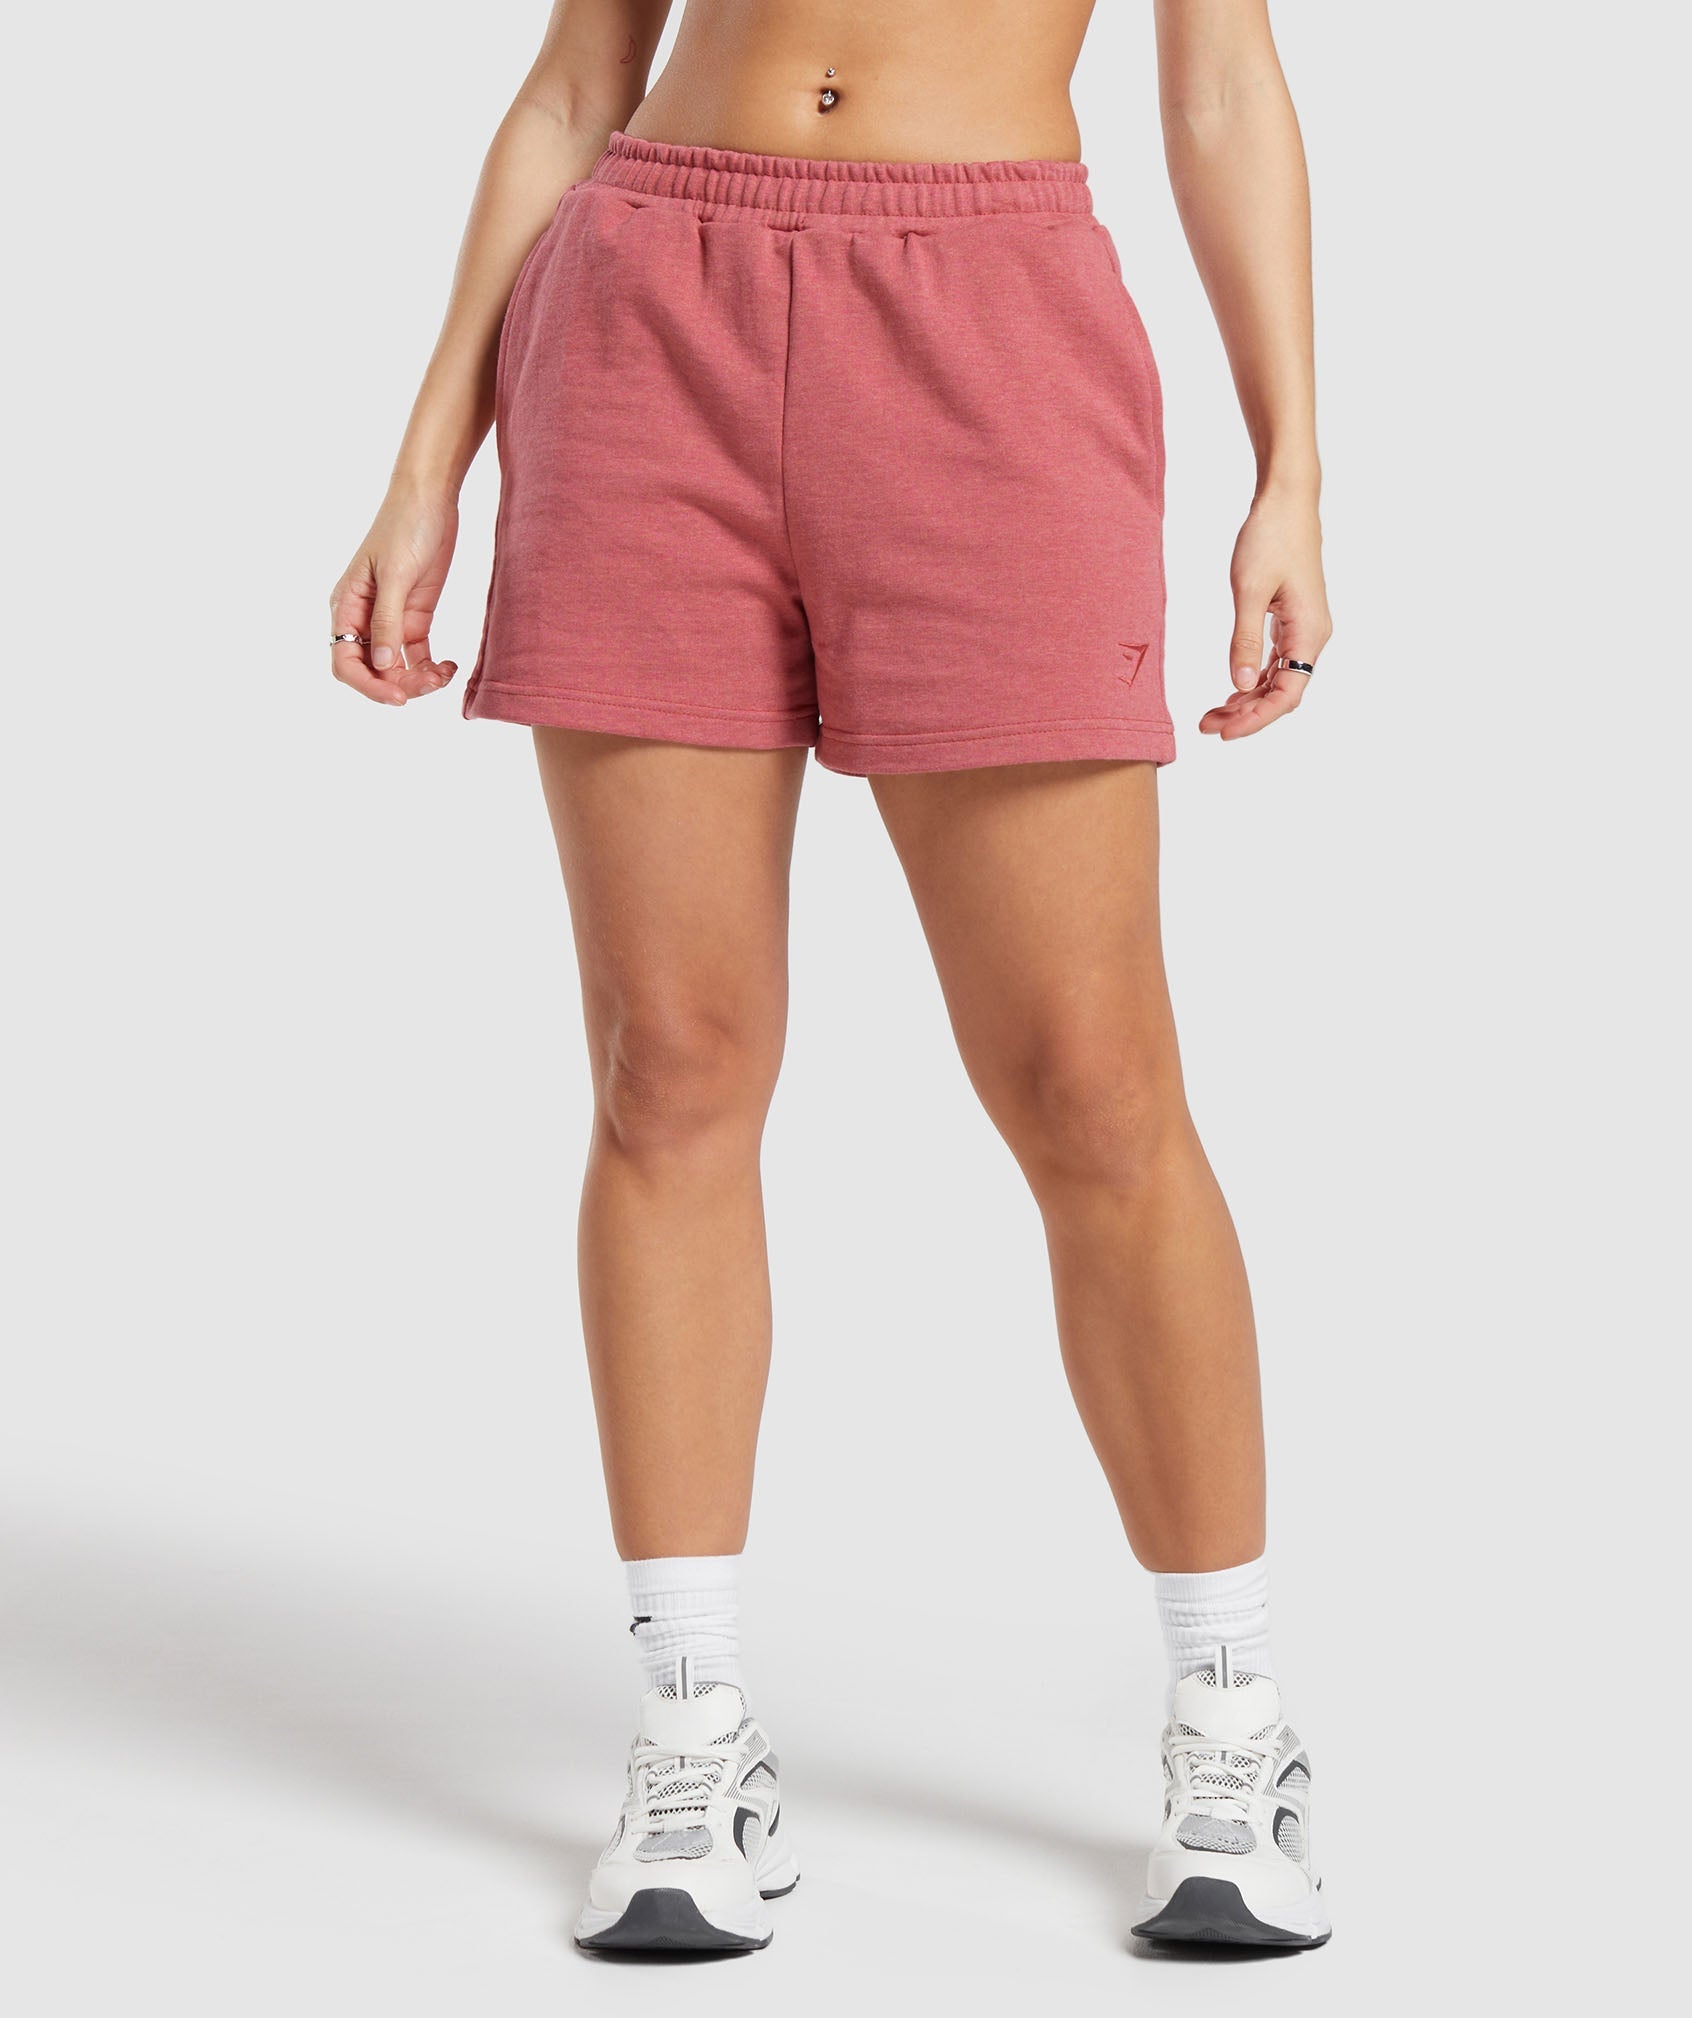 Rest Day Sweat Shorts in Heritage Pink Marl